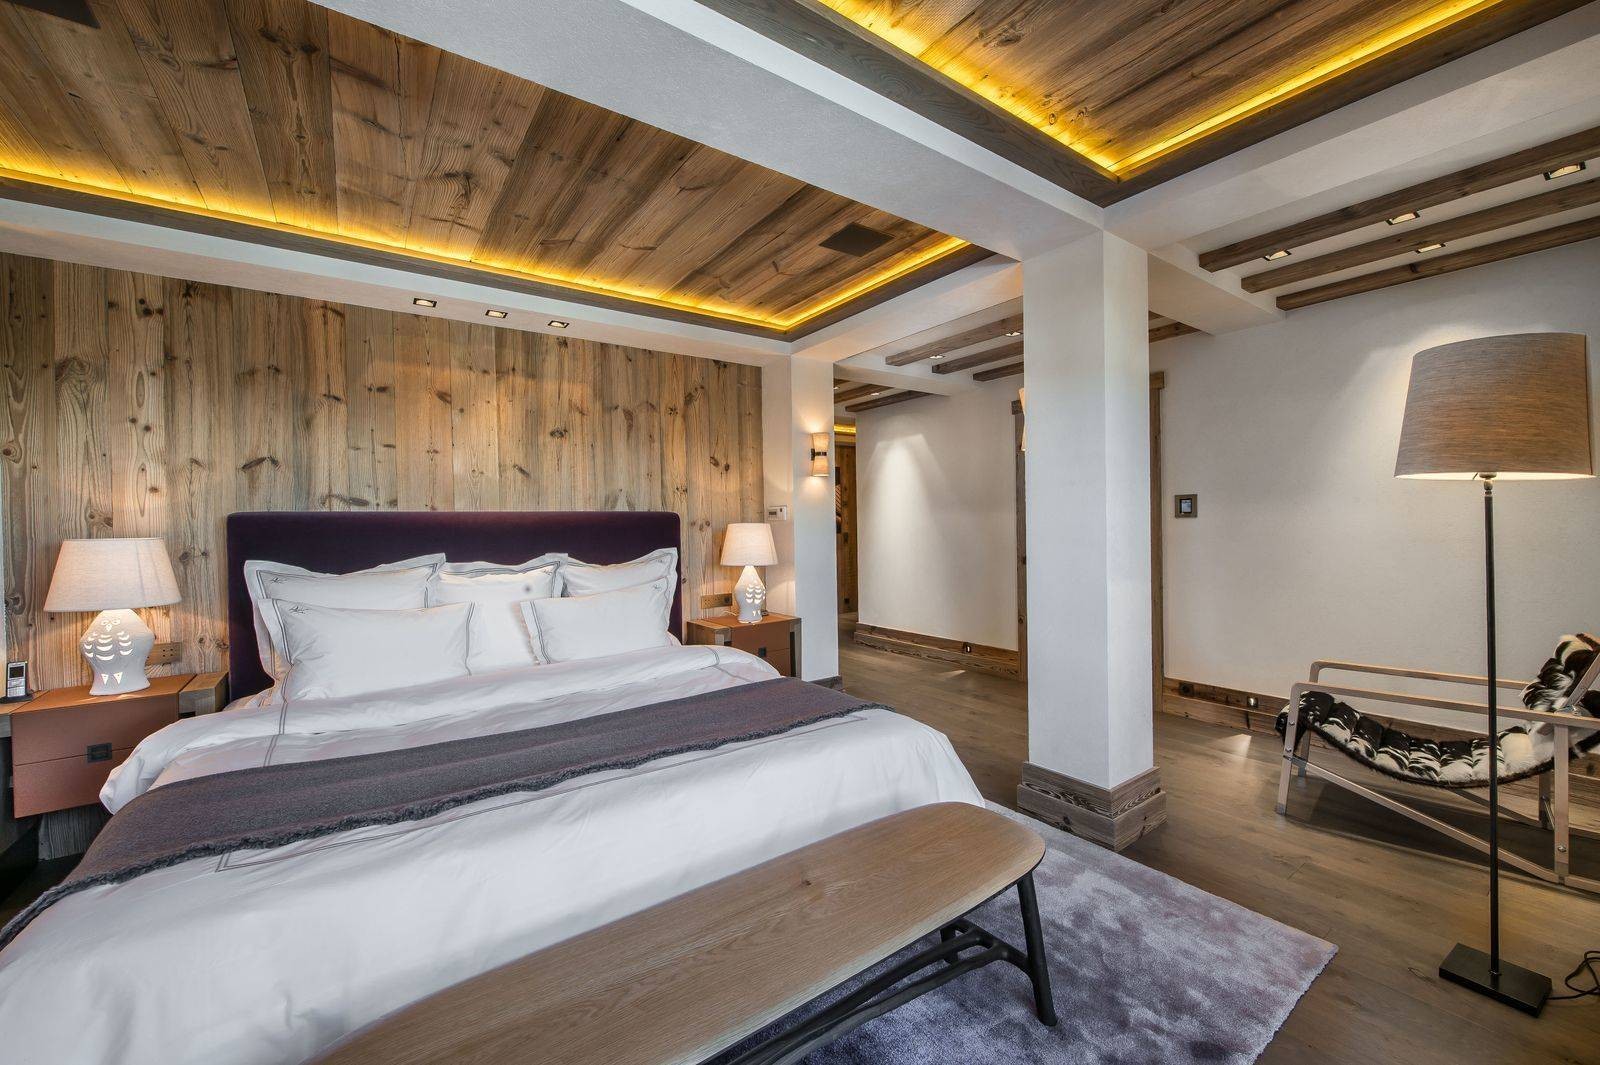 Courchevel 1850 Location Chalet Luxe Chudobaïte Bedroom 8